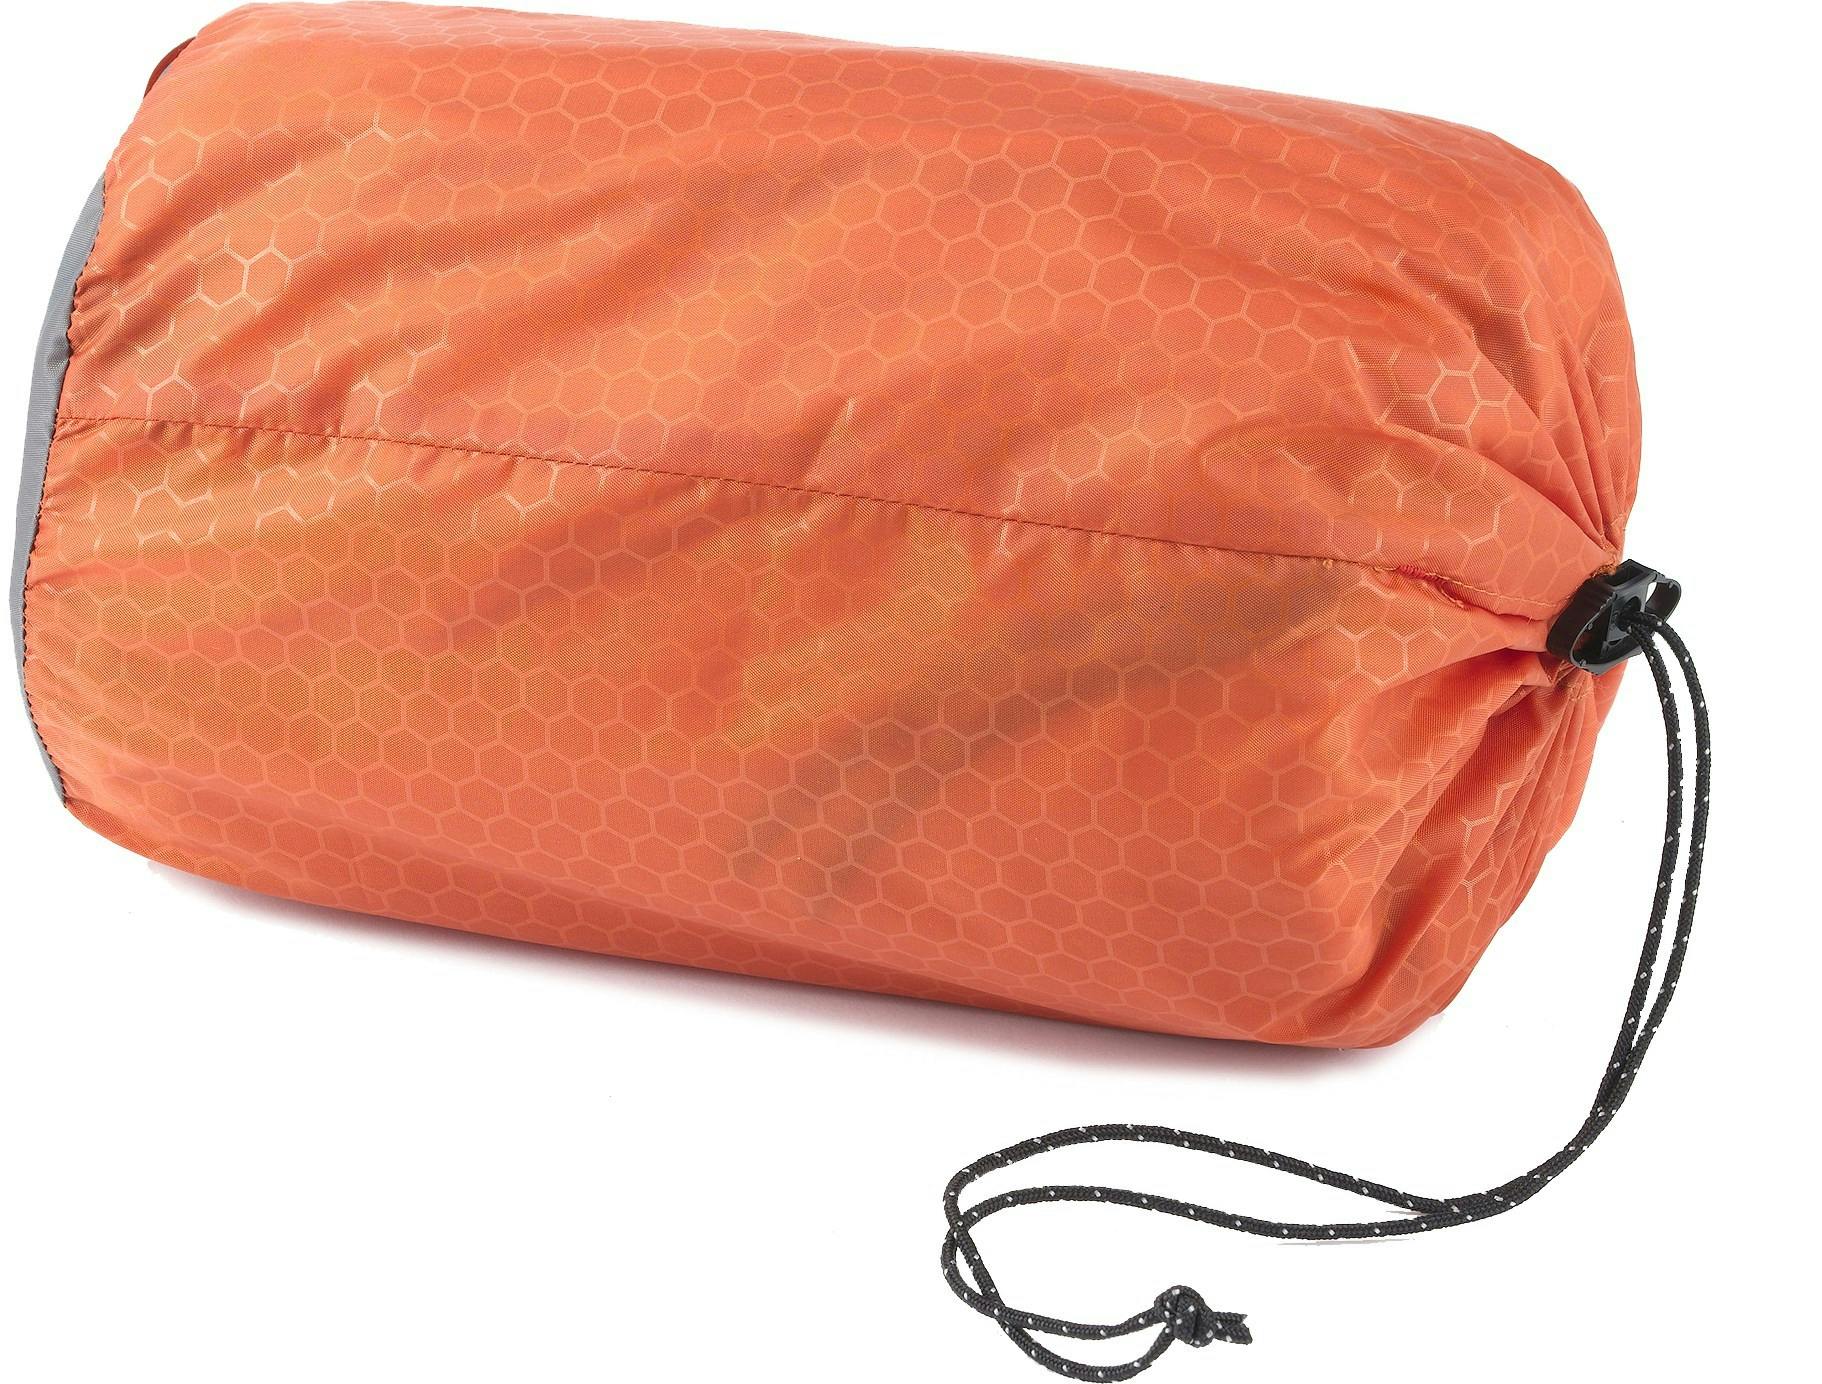 Exped SynMat XP 7 Sleeping Pad · Terracotta/Charcoal